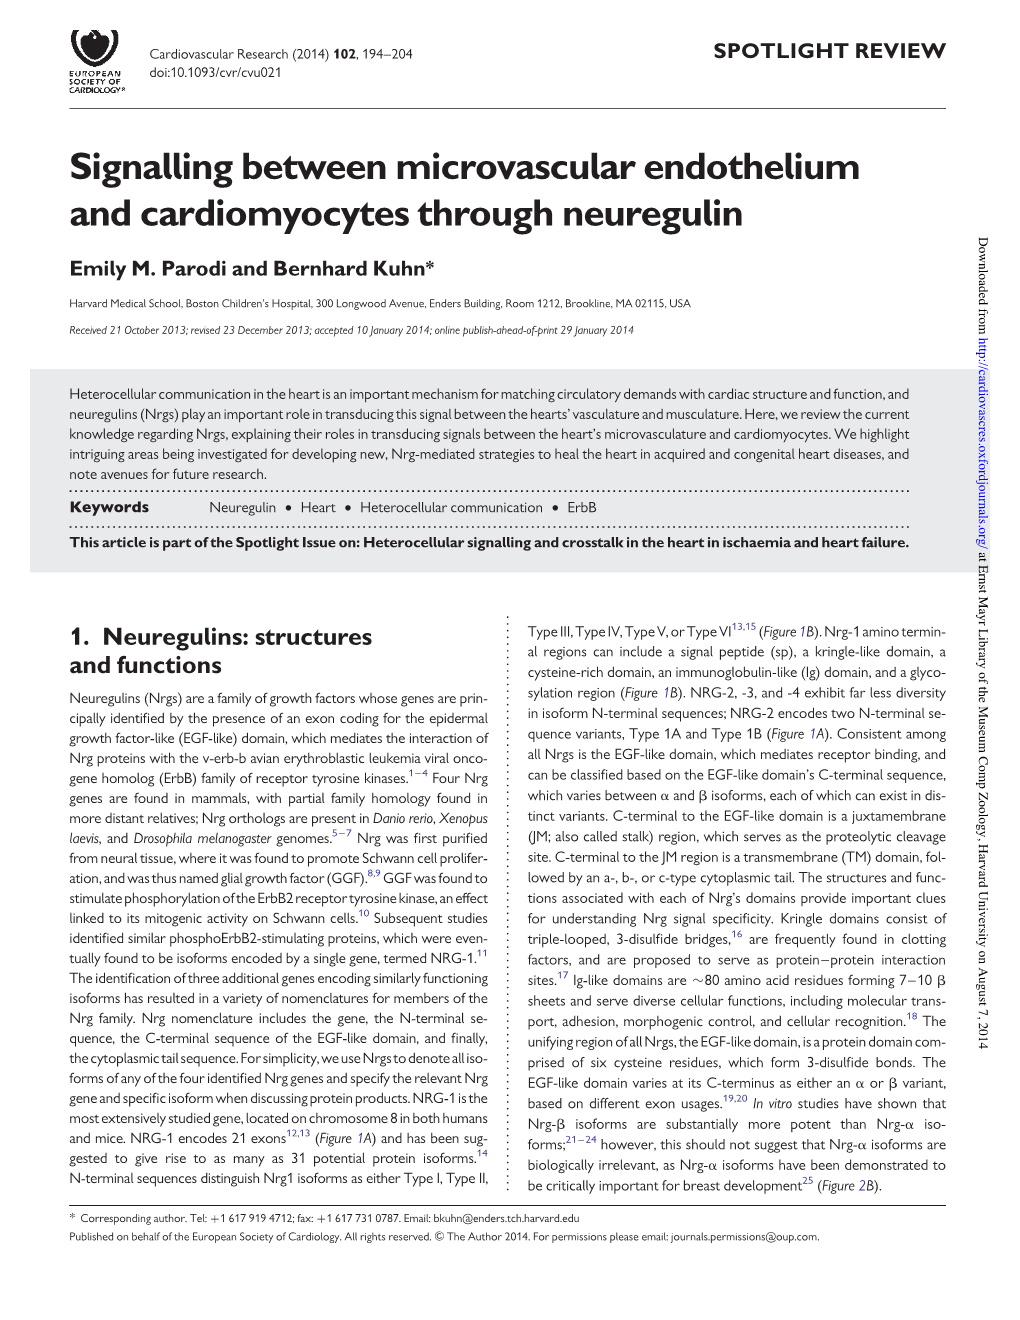 Signalling Between Microvascular Endothelium and Cardiomyocytes Through Neuregulin Downloaded From